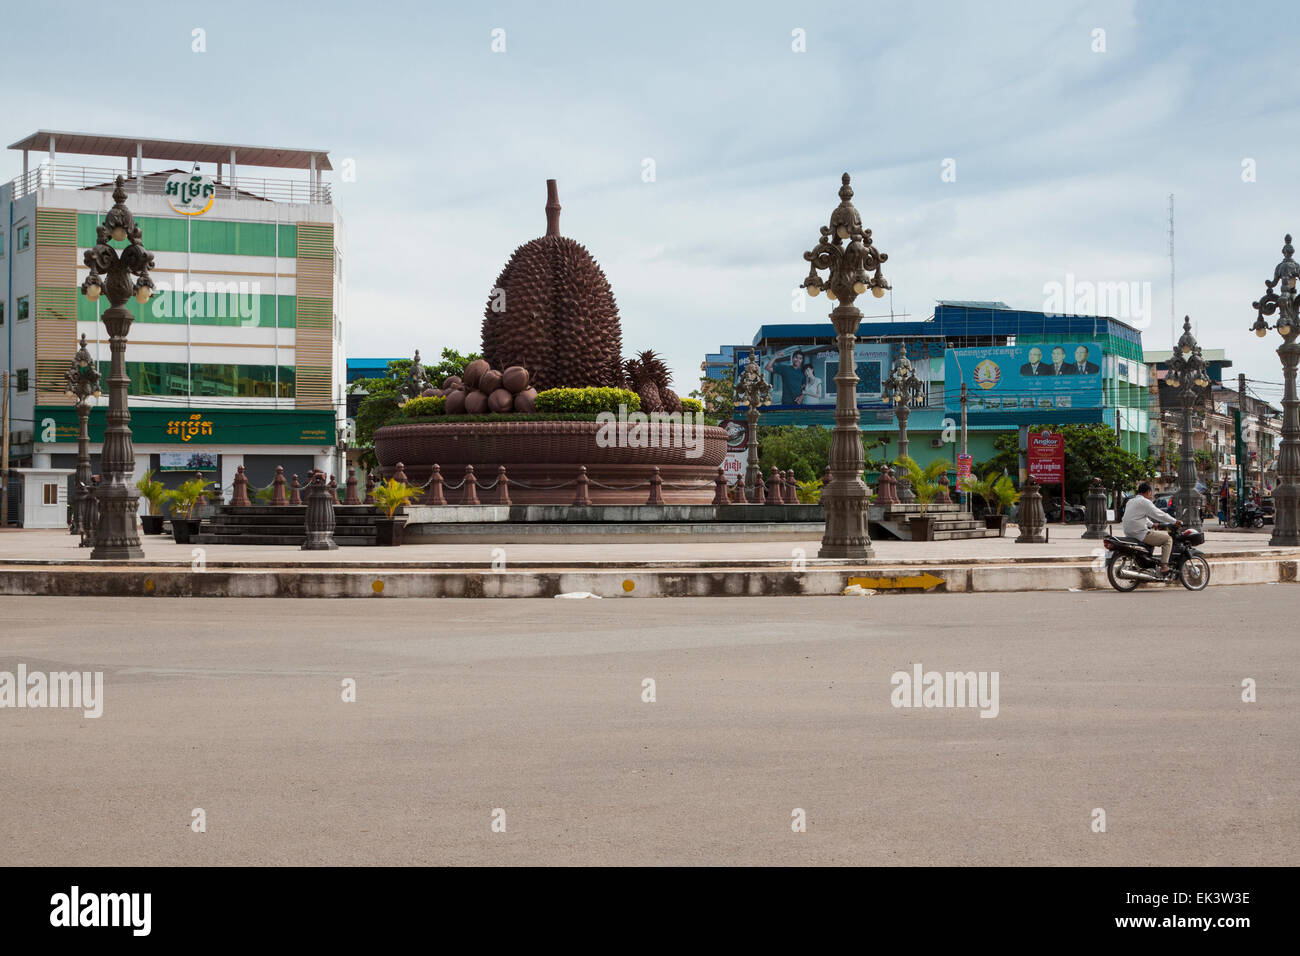 Kampot Town Center - the statue of emblematic Durian fruit - Cambodia, Asia. Stock Photo